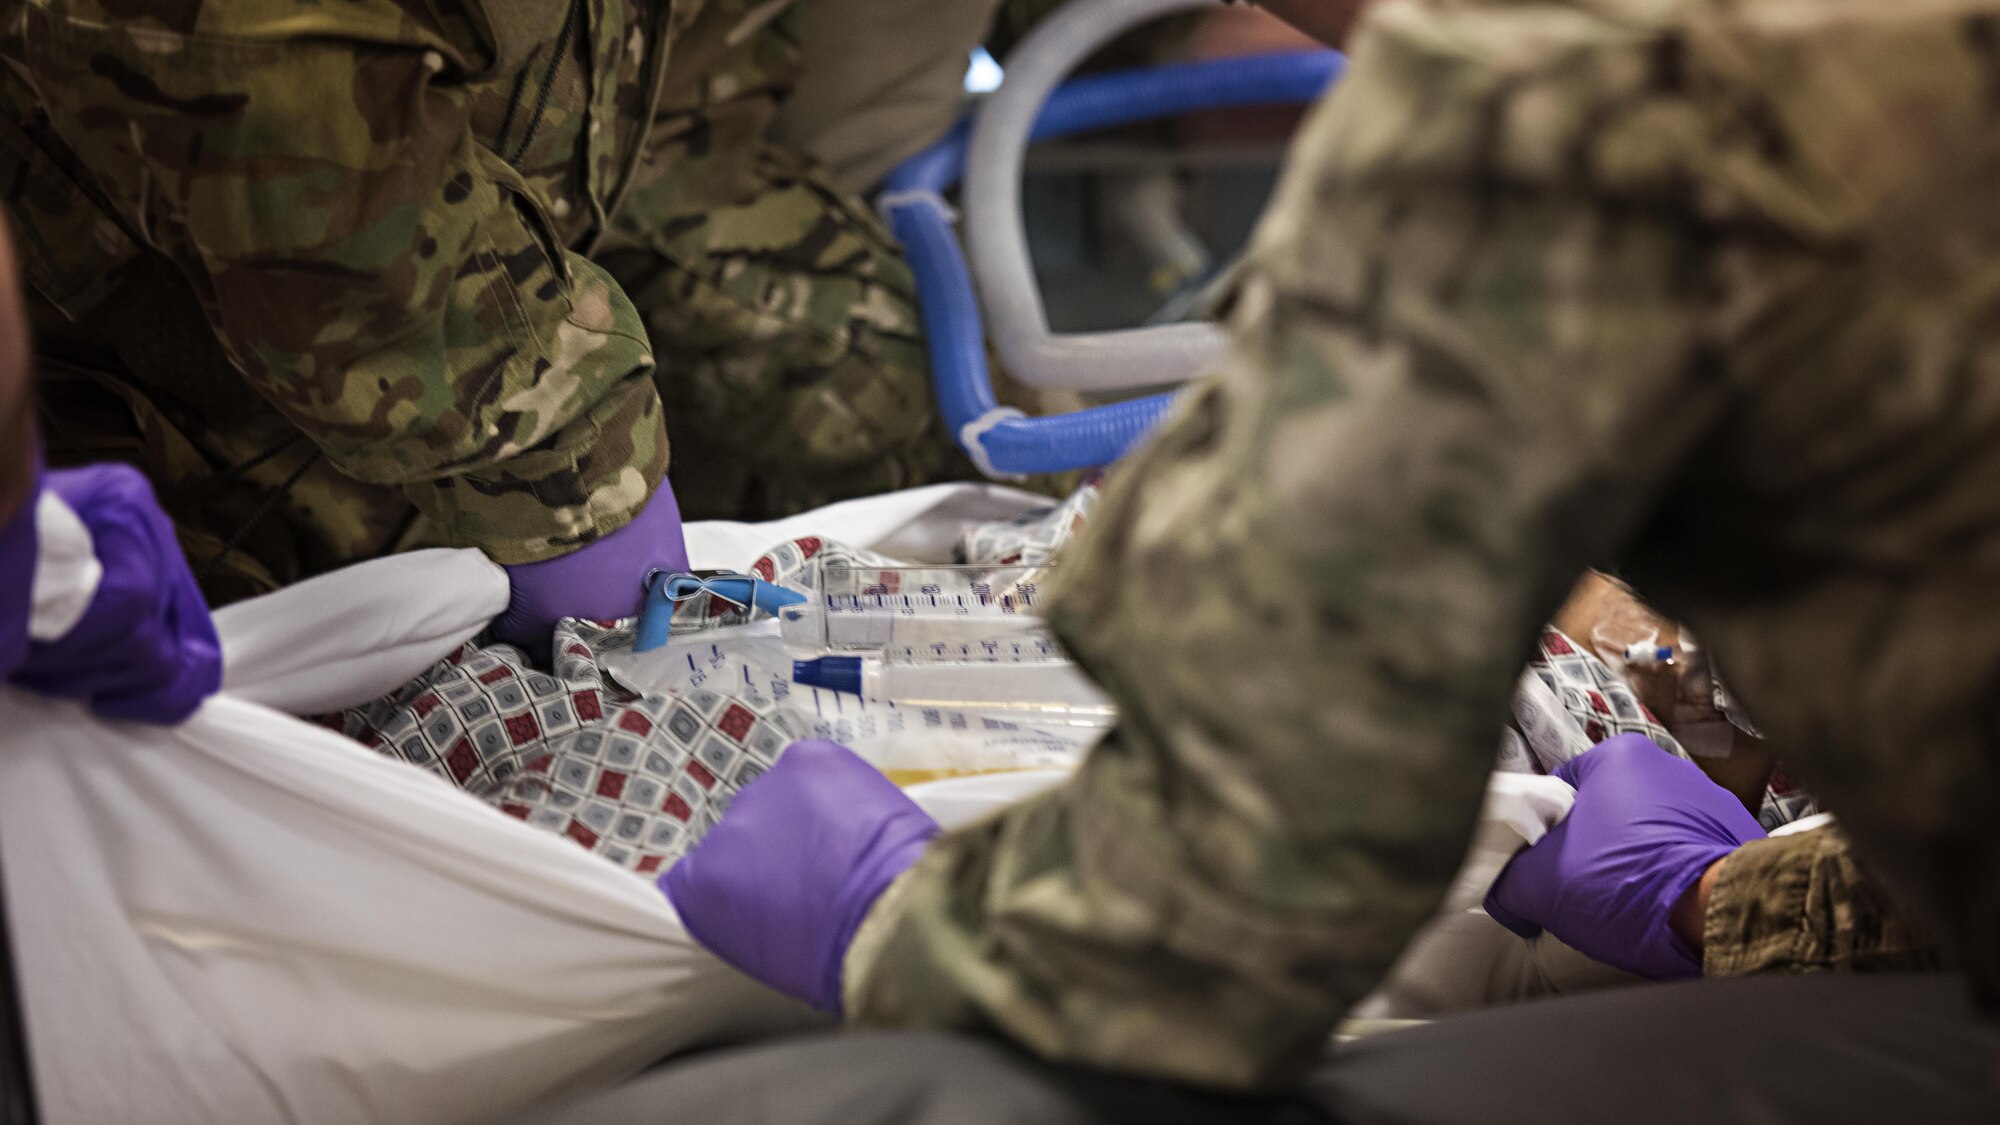 Members of the 455th Expeditionary Aeromedical Evacuation Squadron Critical Care Air Transport Team move a patient onto a litter at the Kandahar Regional Military Hospital, Kandahar Airfield, Afghanistan Feb. 22, 2017. CCATTs are made up of a doctor, a nurse and a respiratory therapist who provide in-flight medical care to critically injured or ill patients. (U.S. Air Force photo by Staff Sgt. Katherine Spessa)